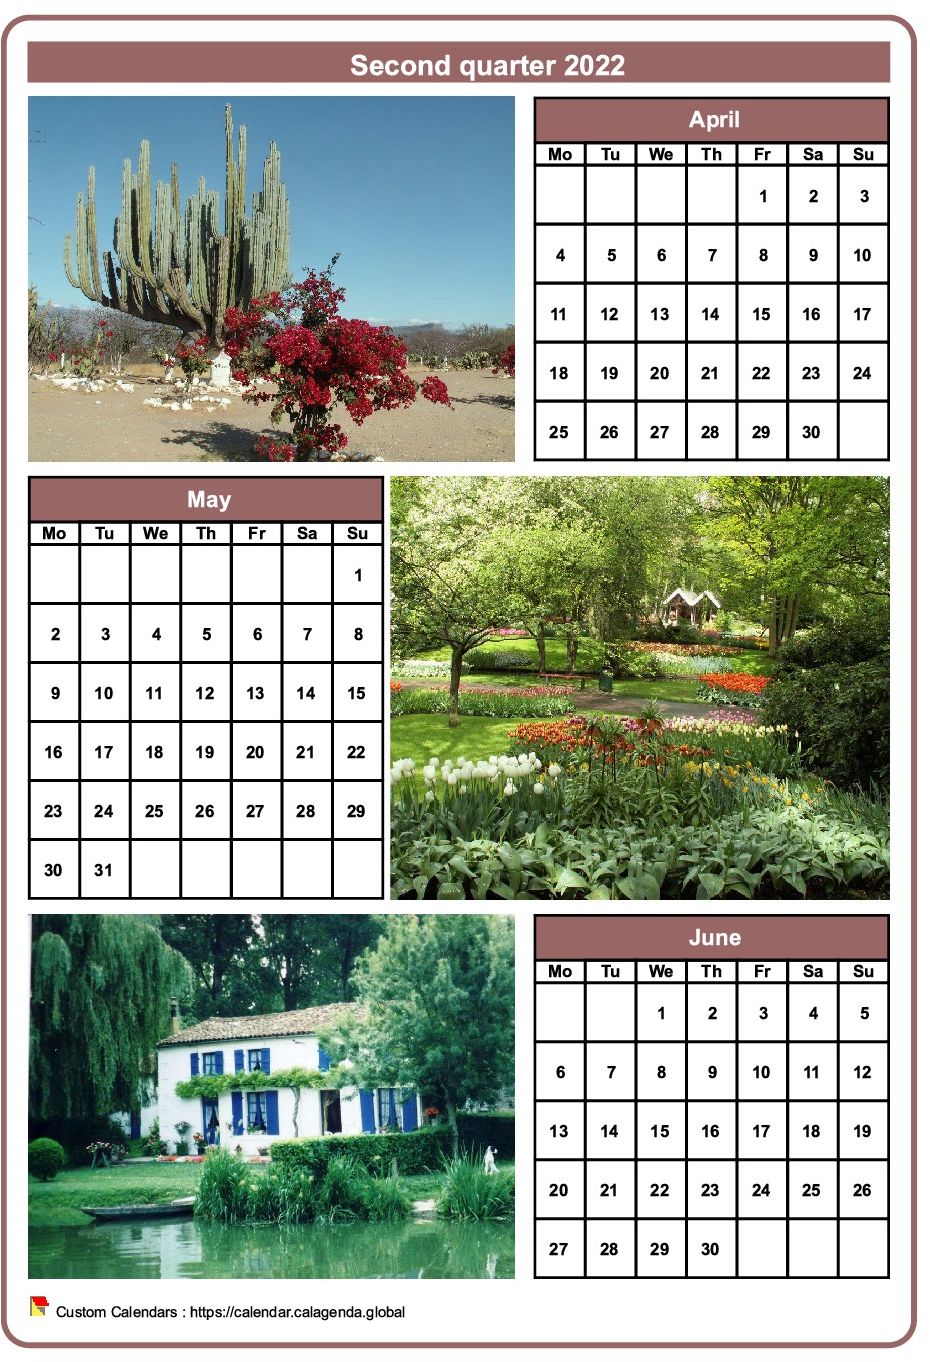 Calendar 2022 quarterly with a different photo every month